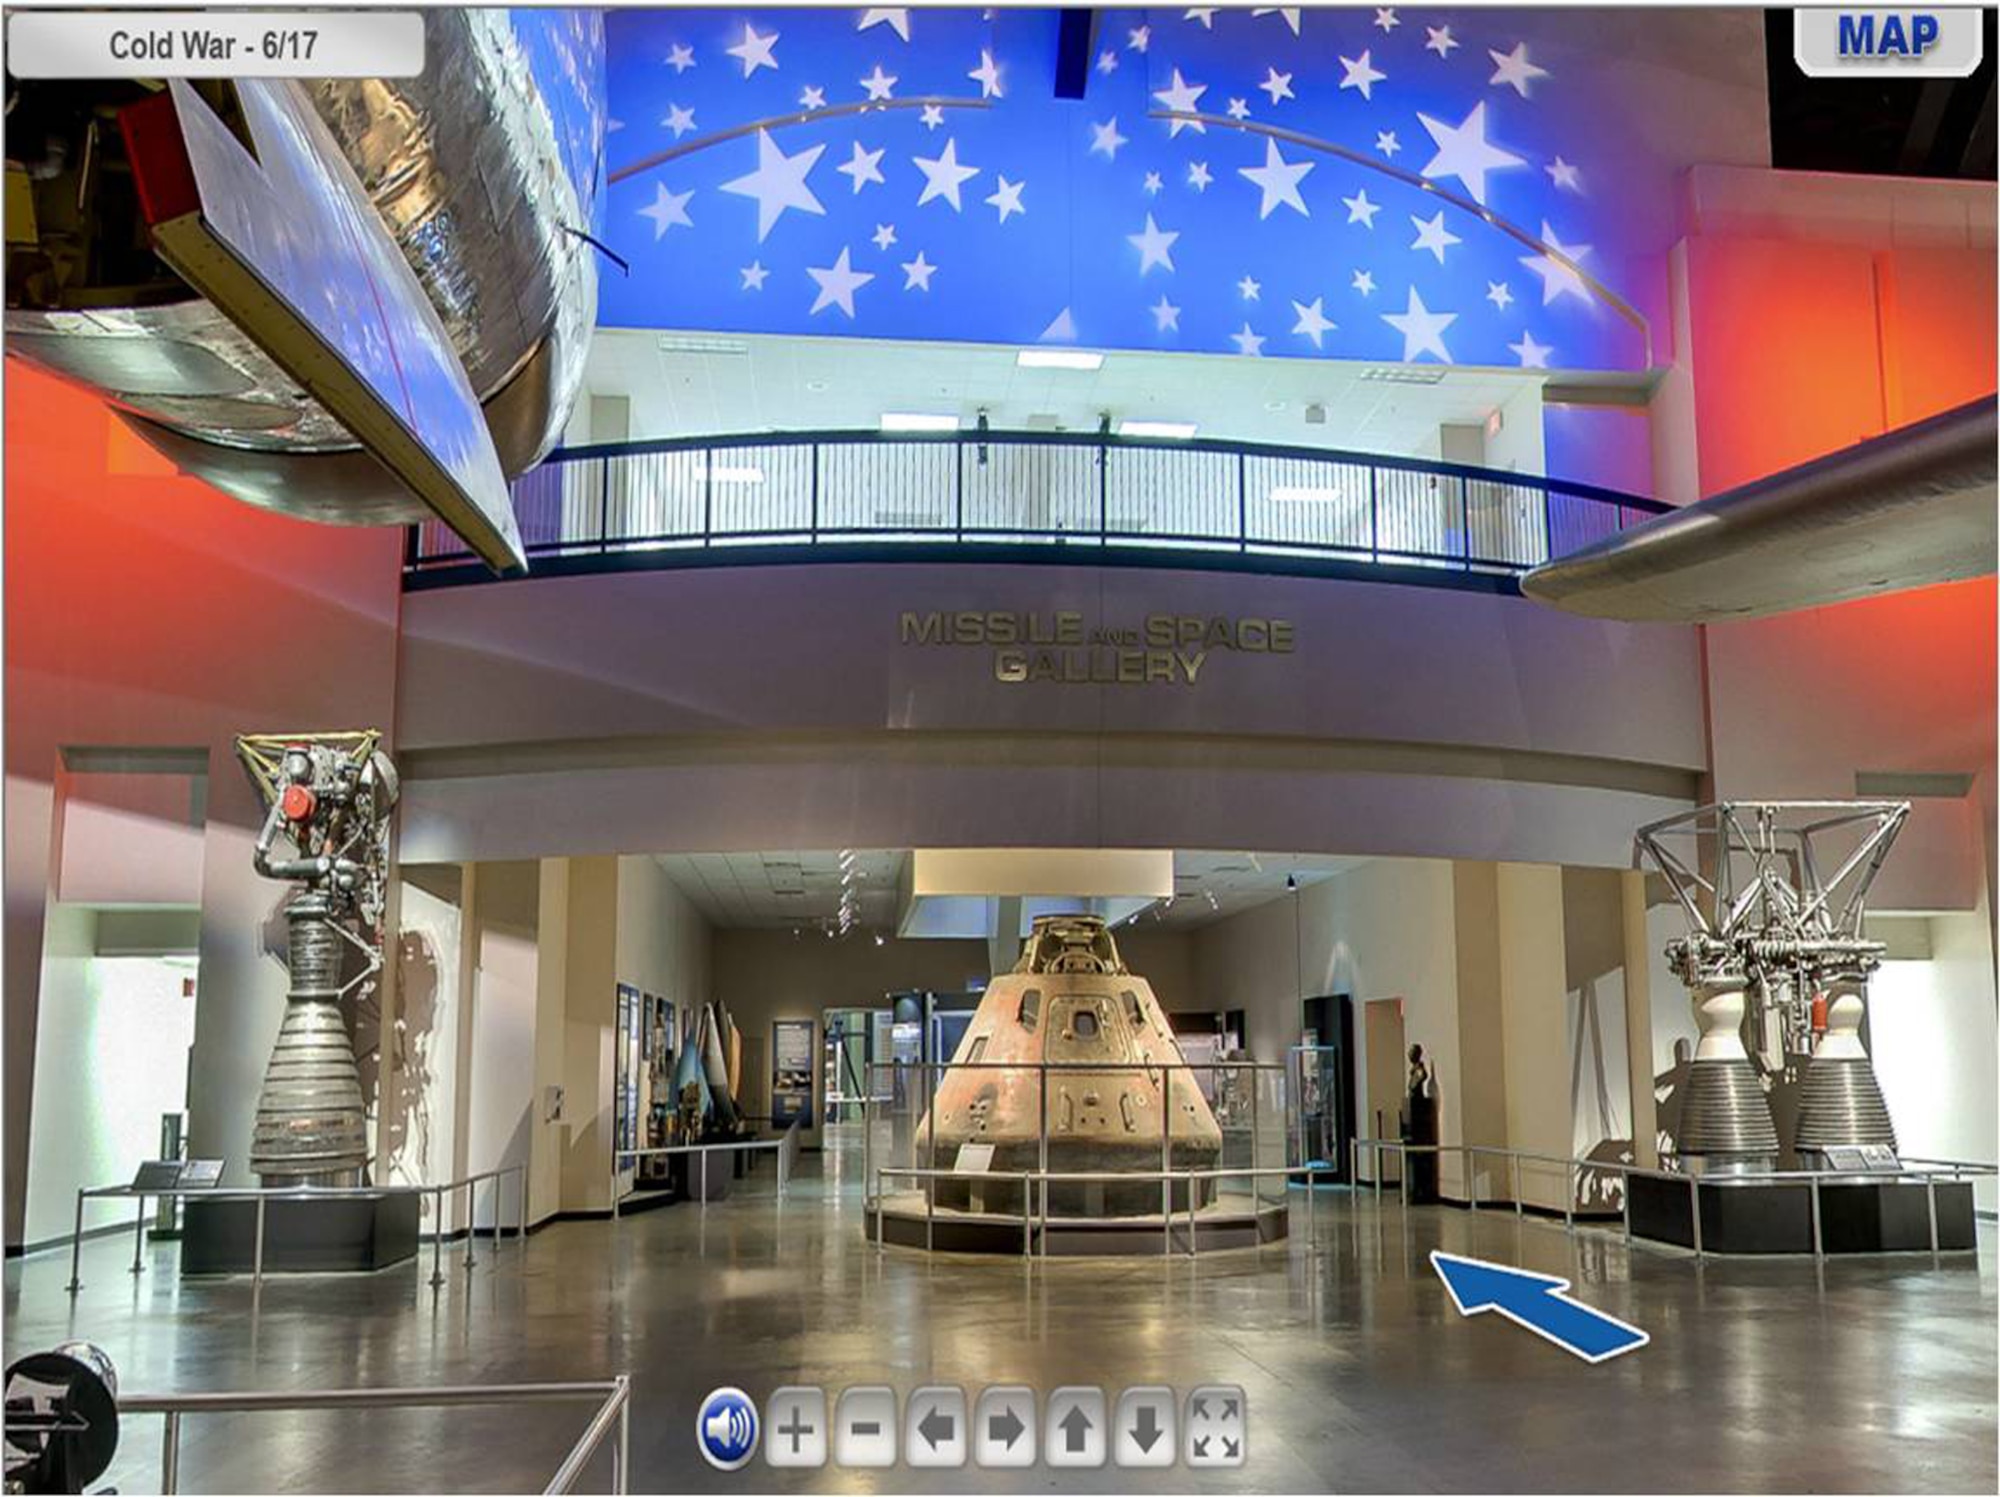 This is a screenshot showing the Apollo 15 Command Module at the entrance of the Missile and Space Gallery from the National Museum of the U.S. Air Force's Virtual Tour website. (U.S. Air Force image)